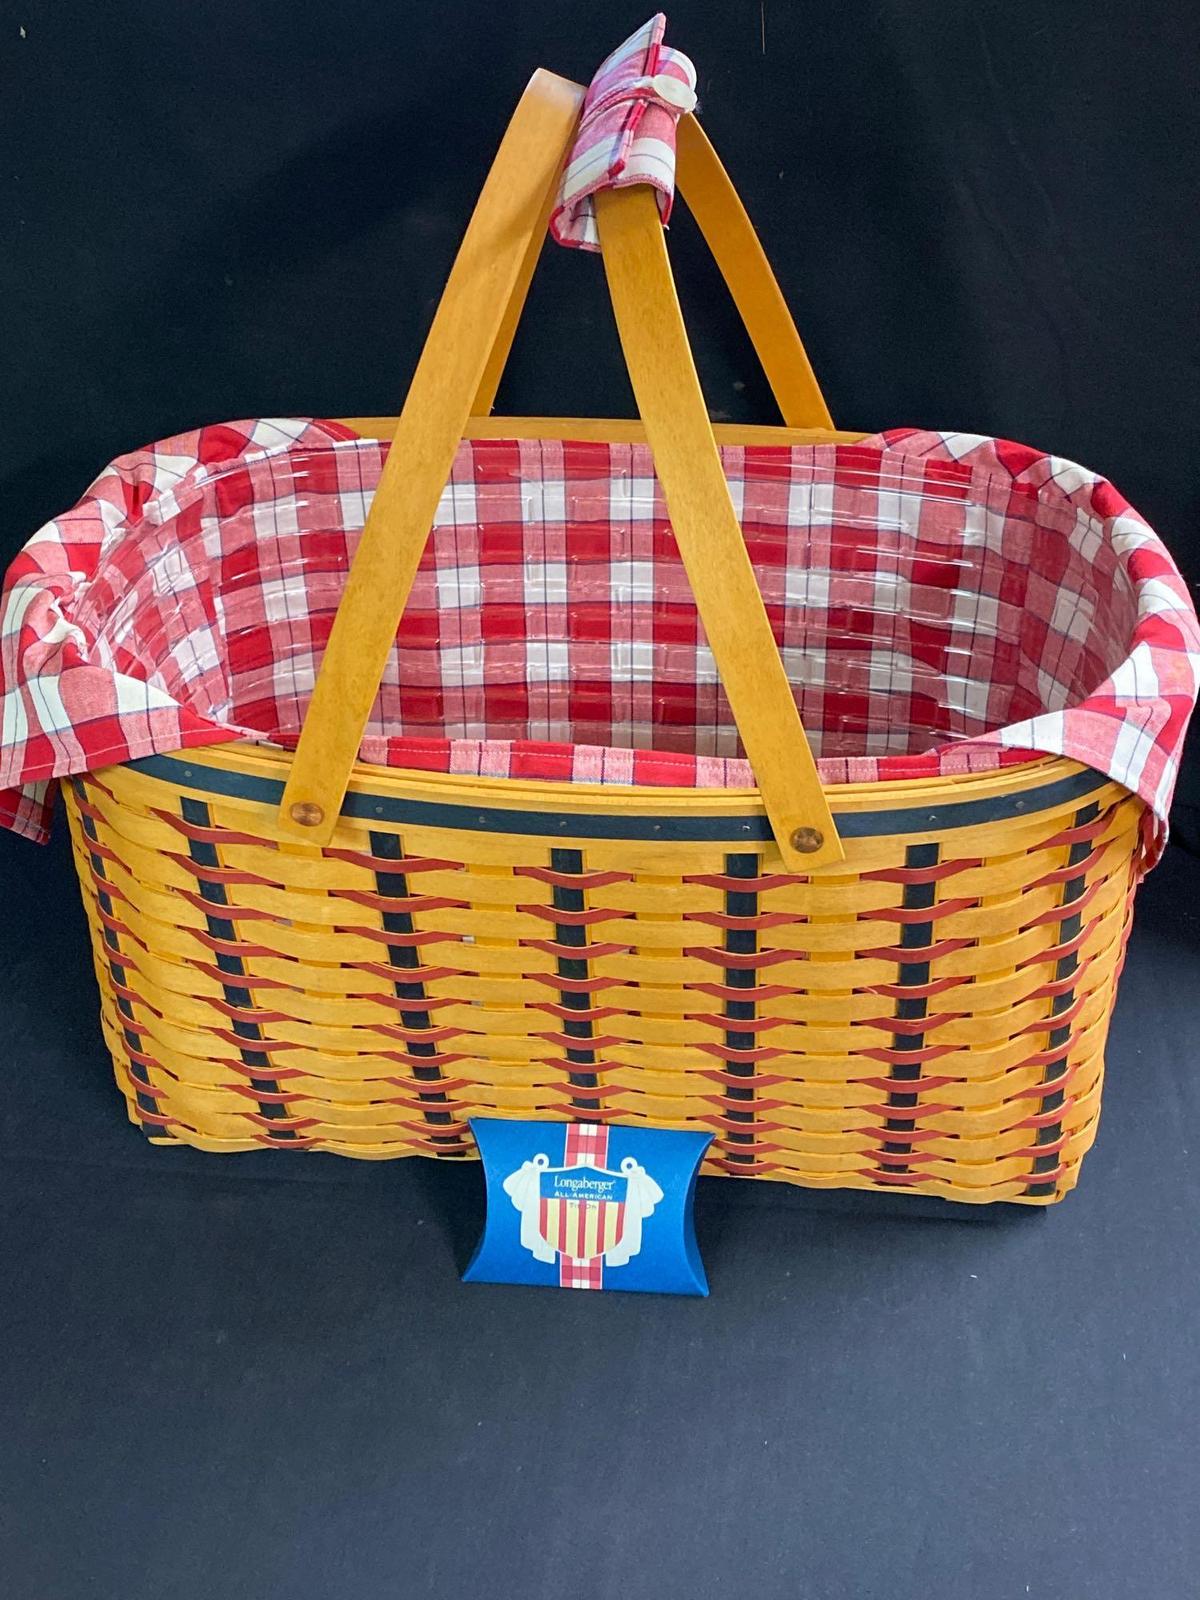 All American block party basket 2002